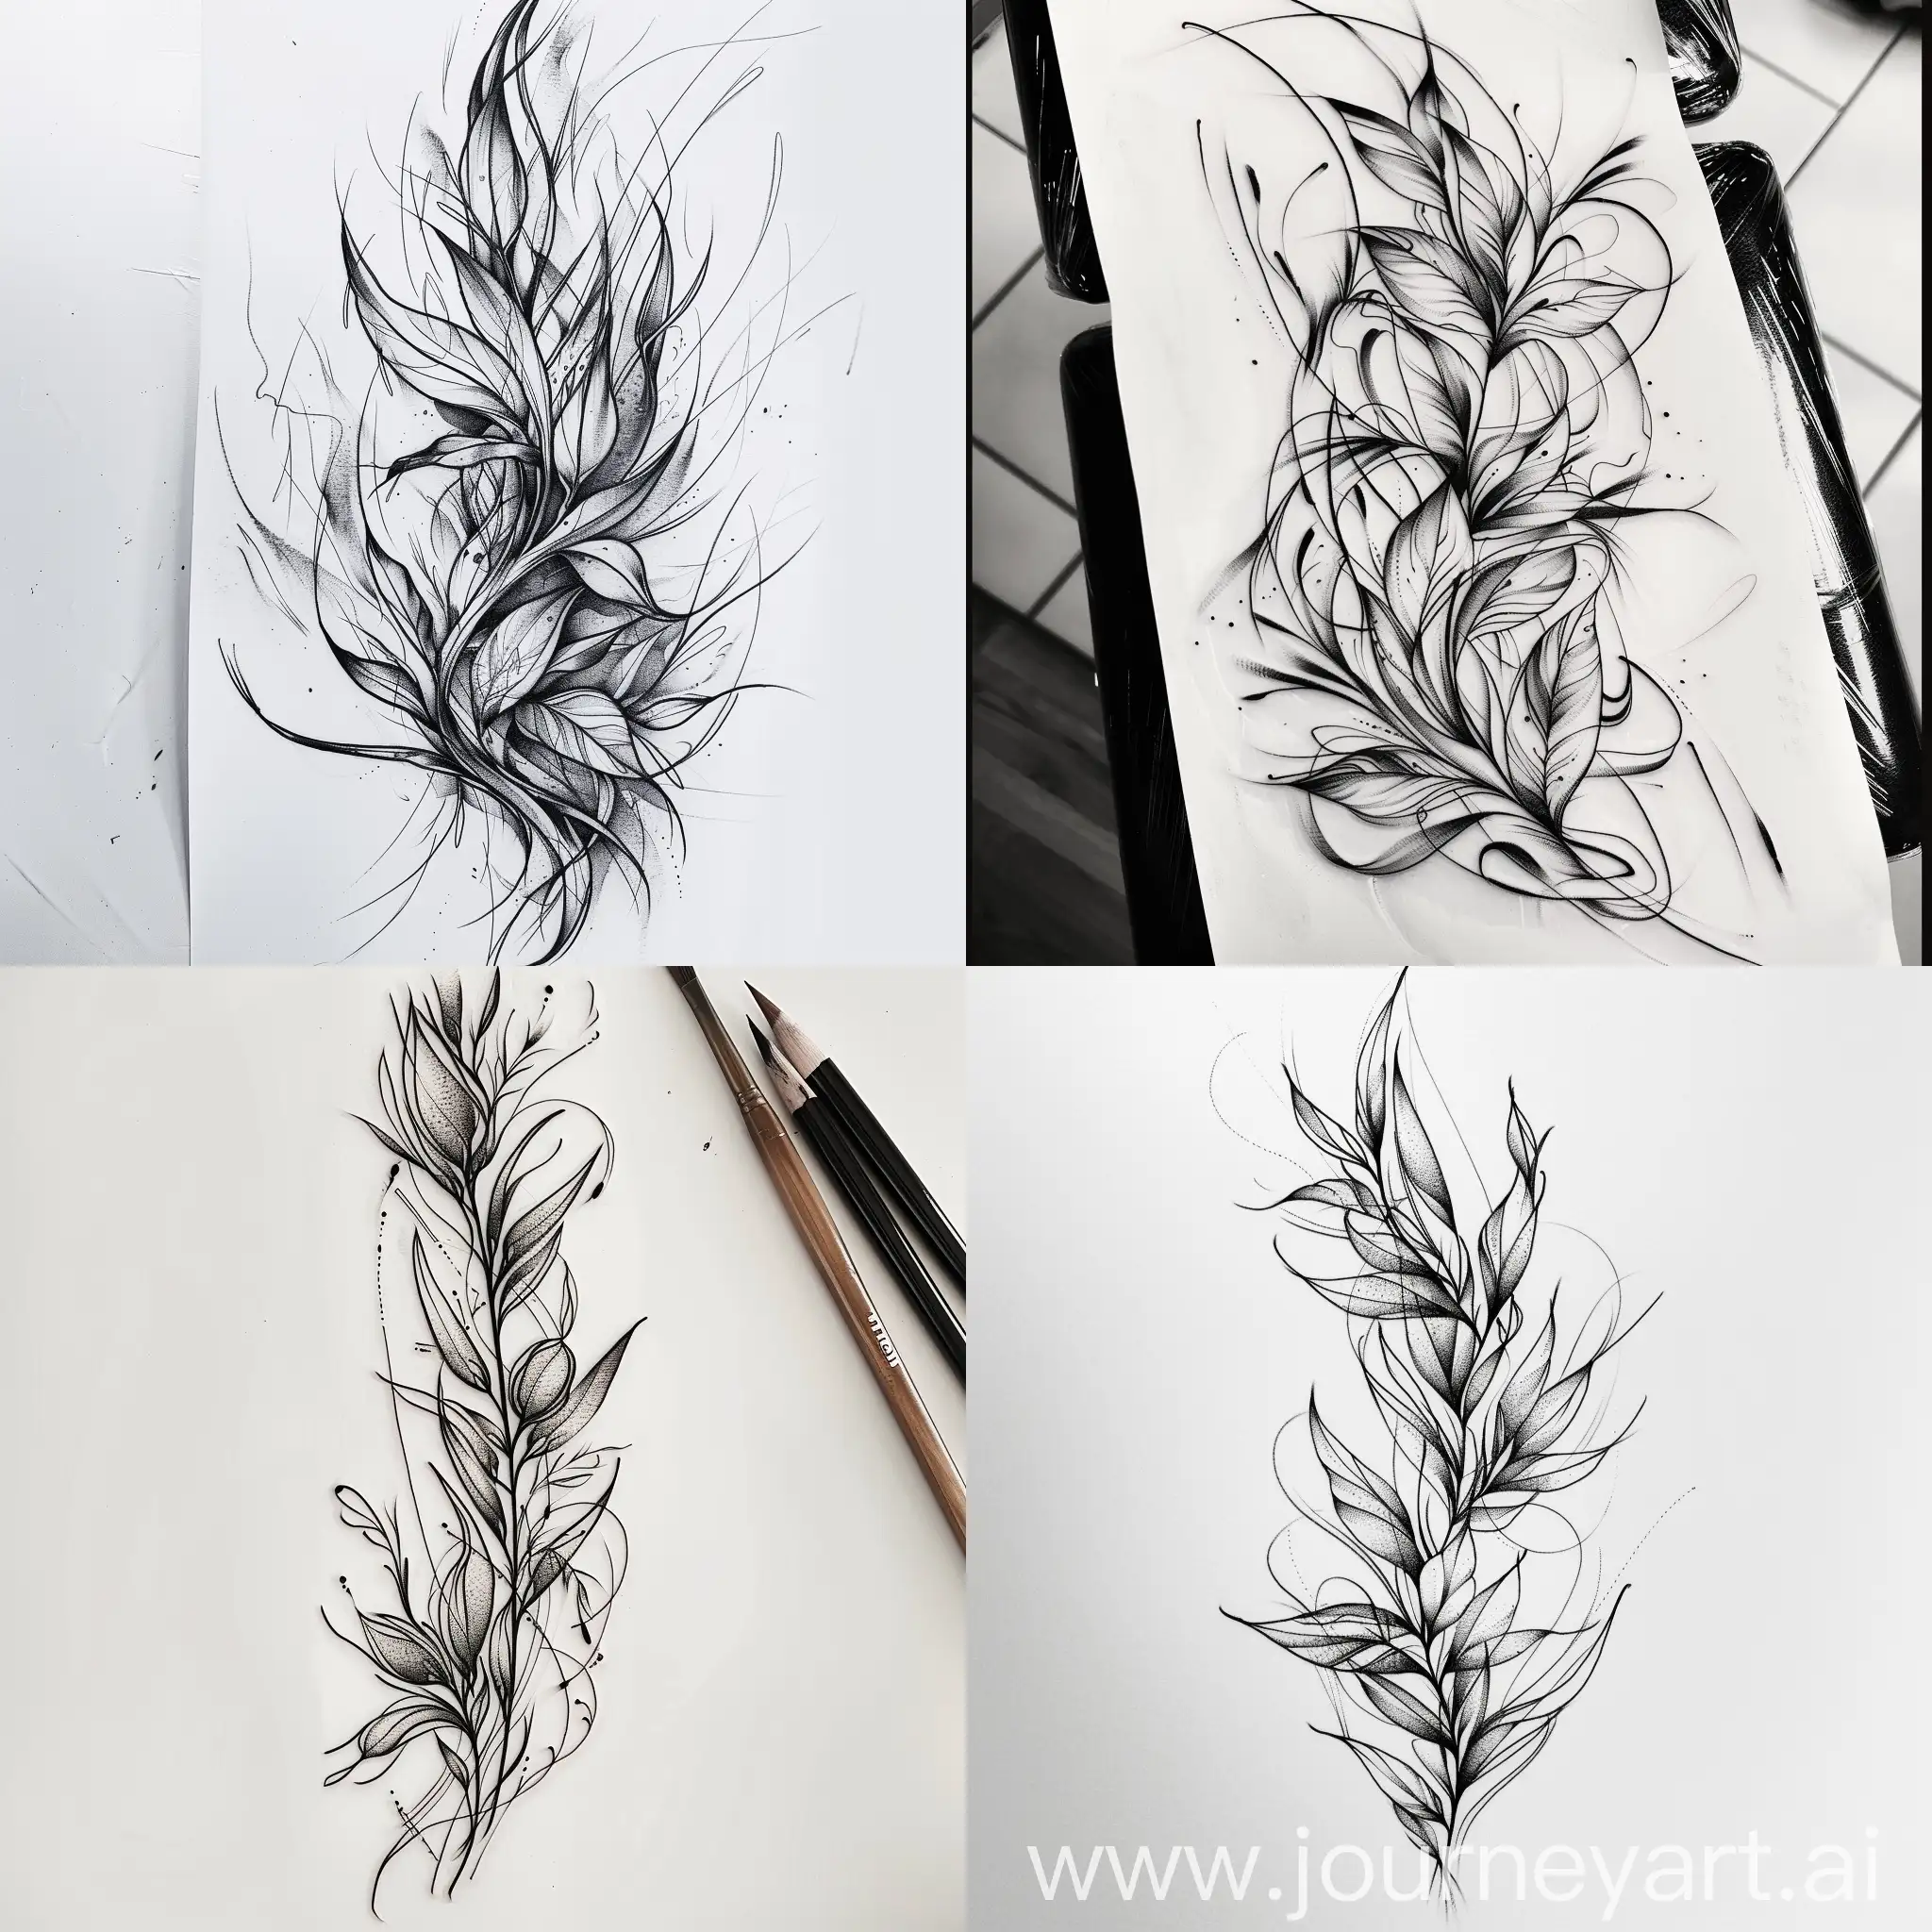 Botanical-Elegance-Sketch-Tattoo-Design-with-Intricate-Lines-and-Brush-Strokes